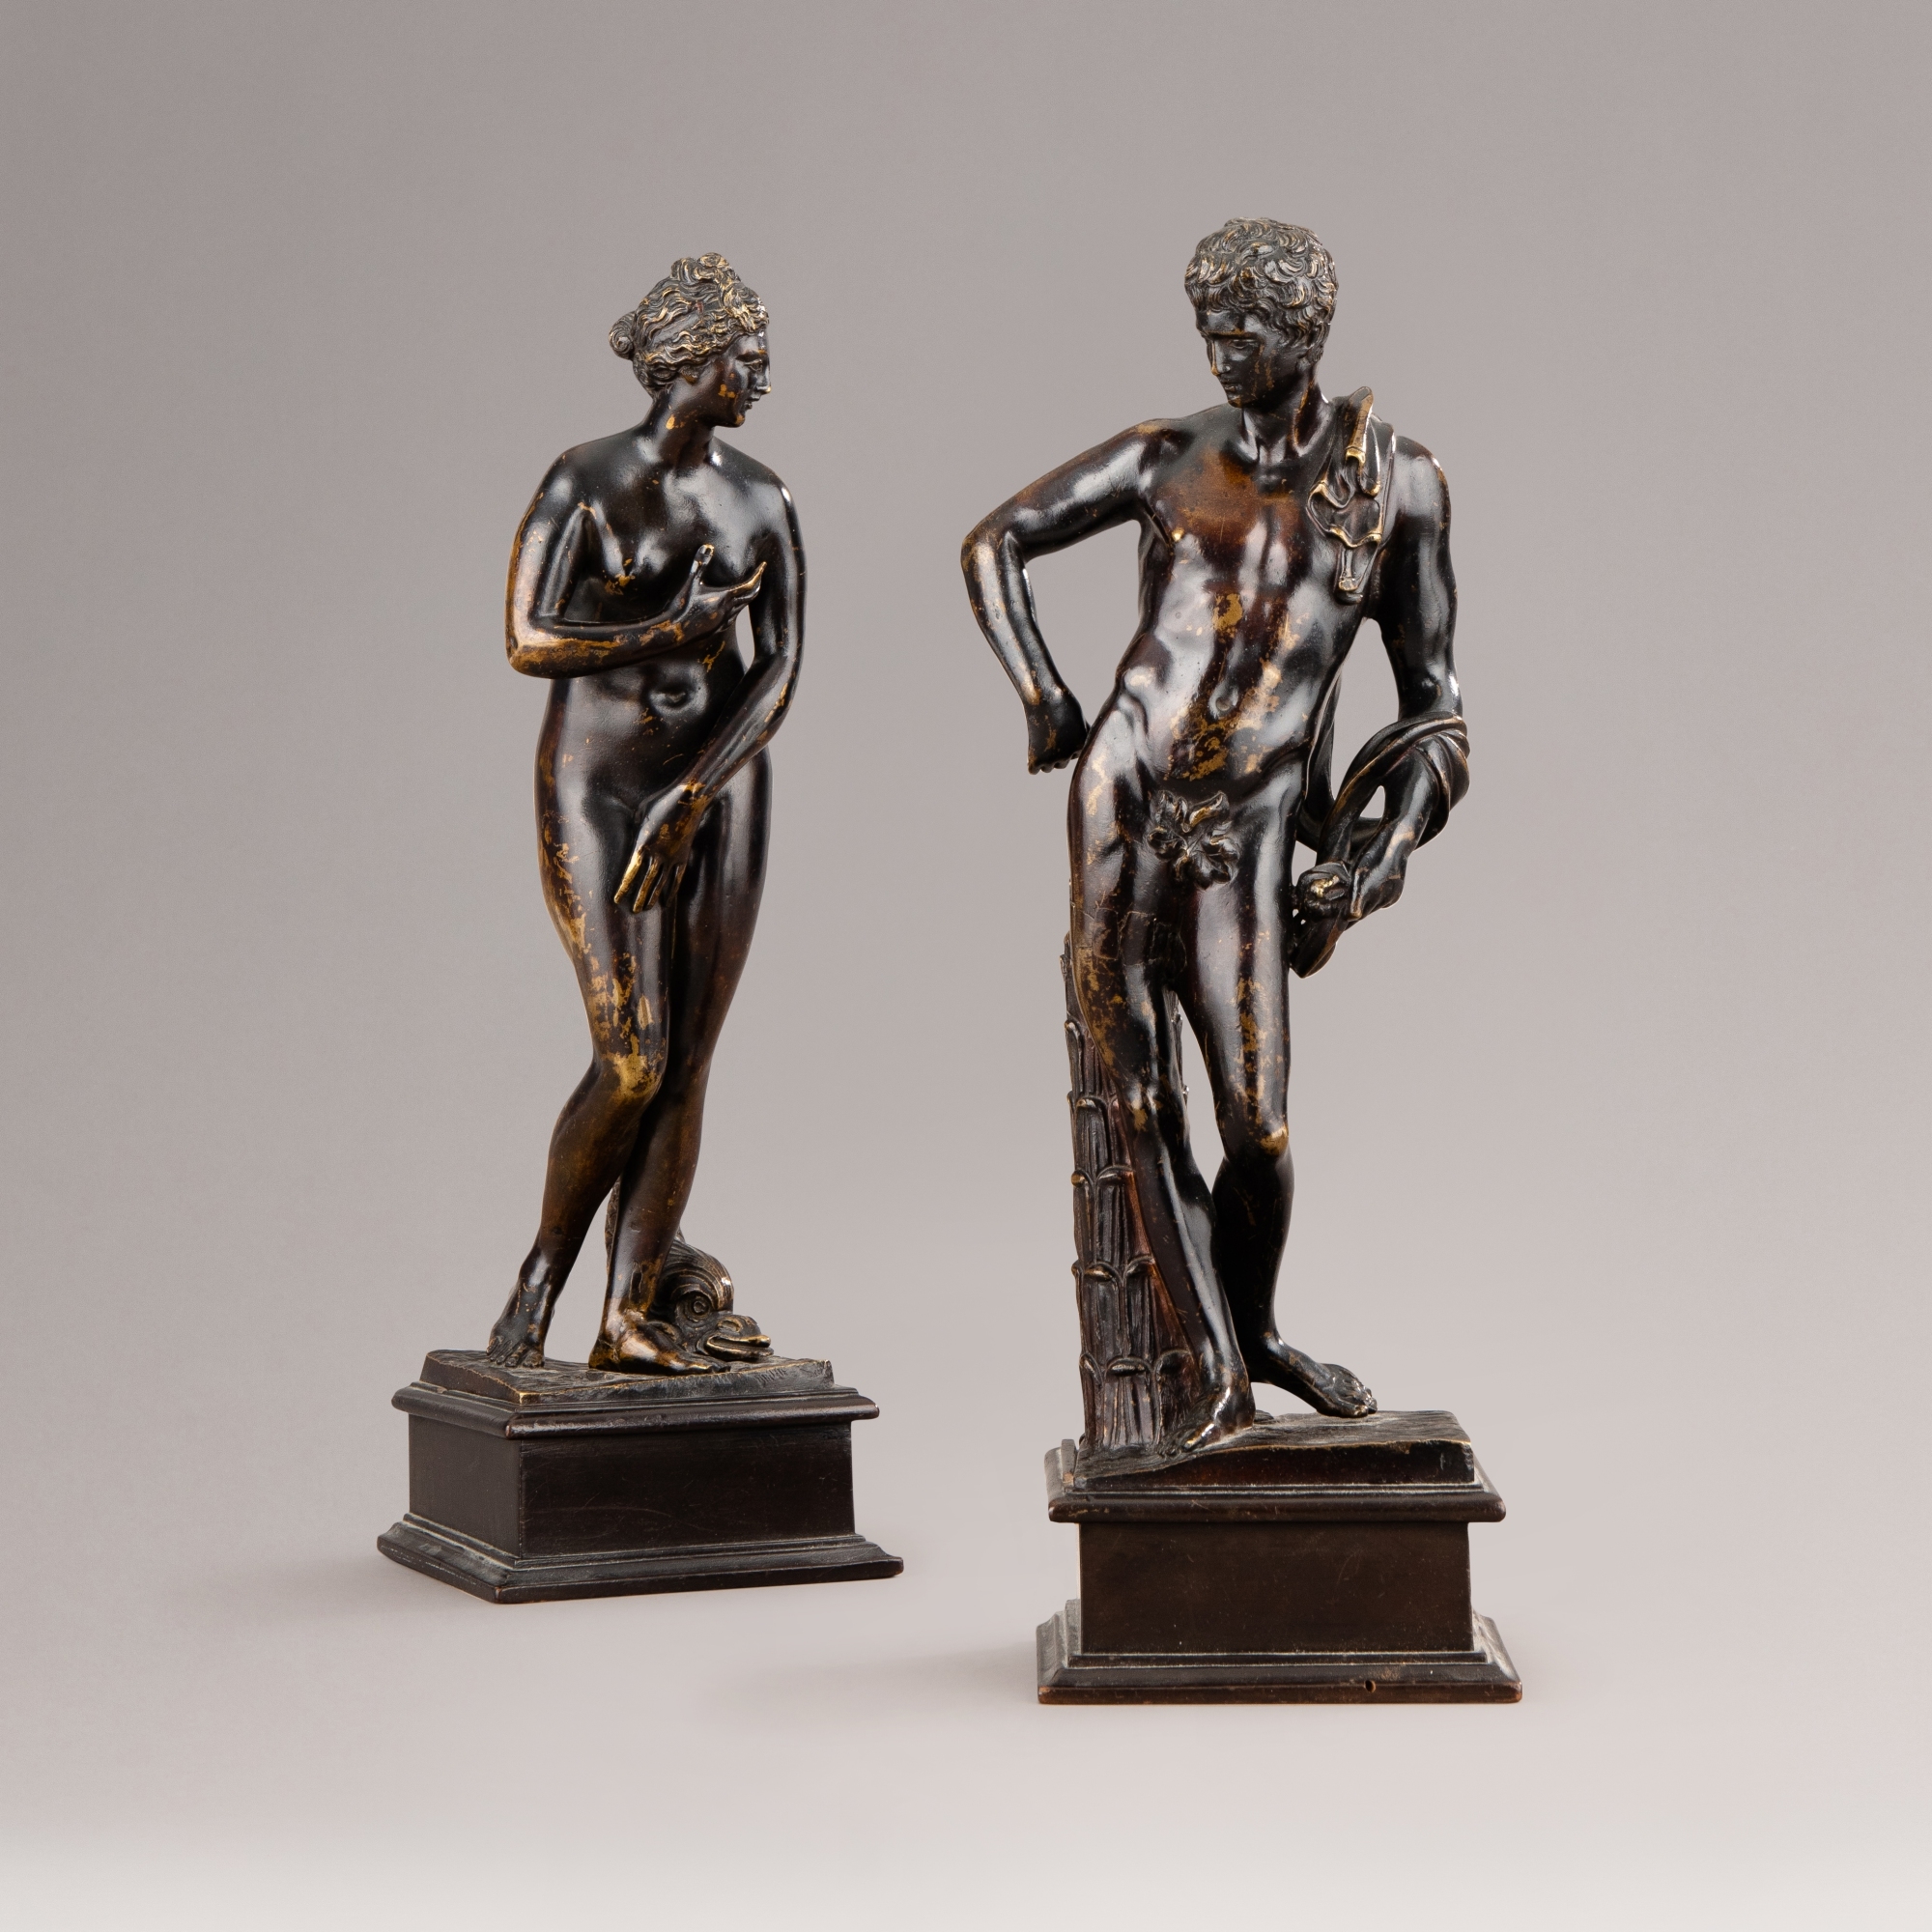 Artwork by French School, 18th Century, Vénus pudique & Antinoüs, Made of bronzes, brown patina